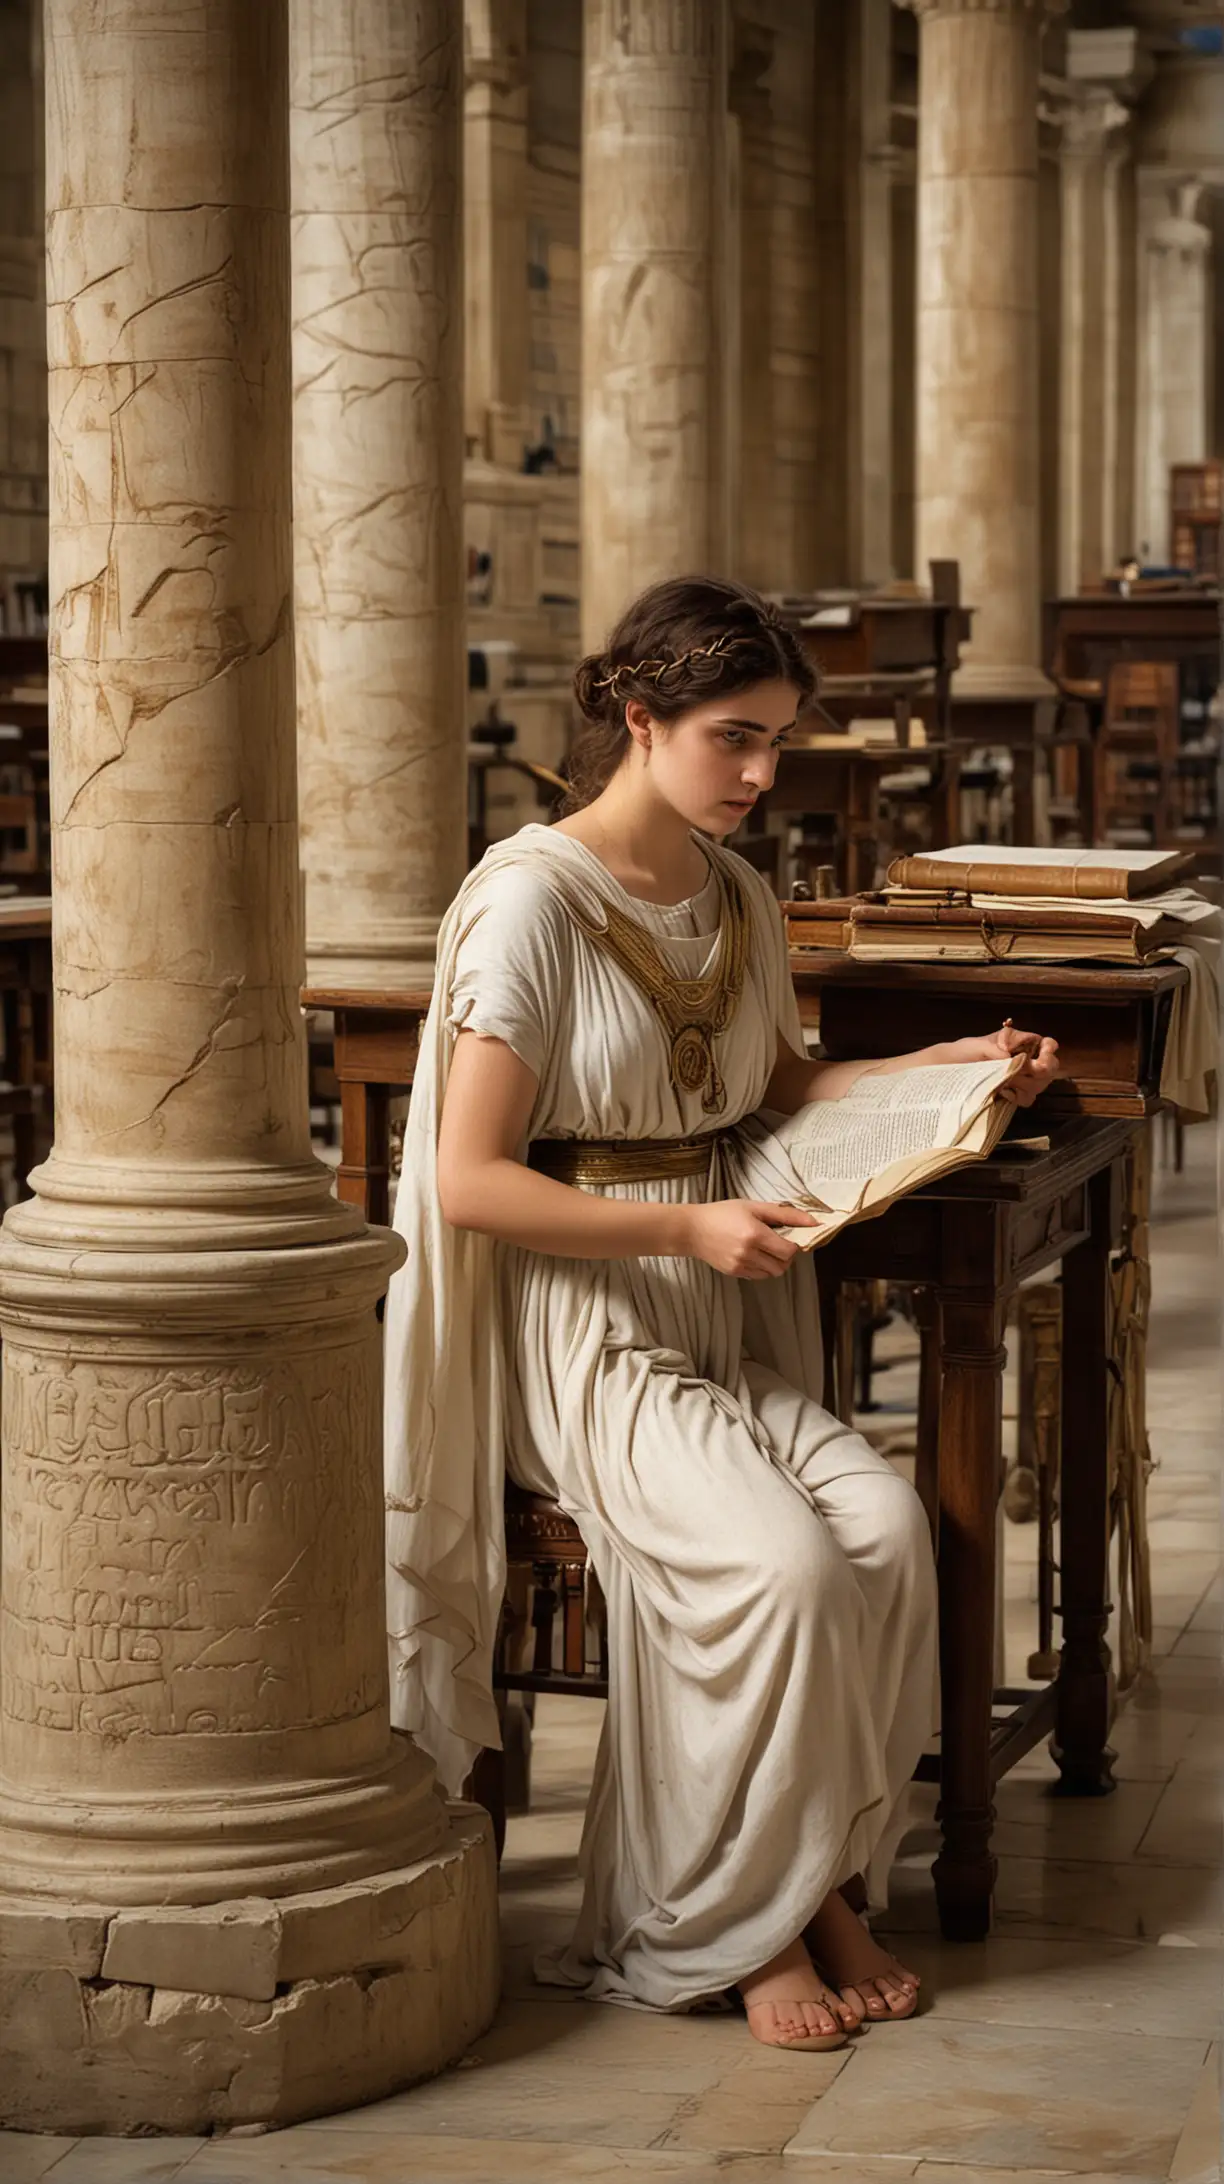 Hypatia in her Youth: A young Hypatia, dressed in ancient Greek attire, studying scrolls and learning from her father, Theon, in a grand Alexandrian library filled with ancient manuscripts and scientific instruments. The scene includes Roman architectural elements, highlighting that Alexandria was part of the Roman Empire.